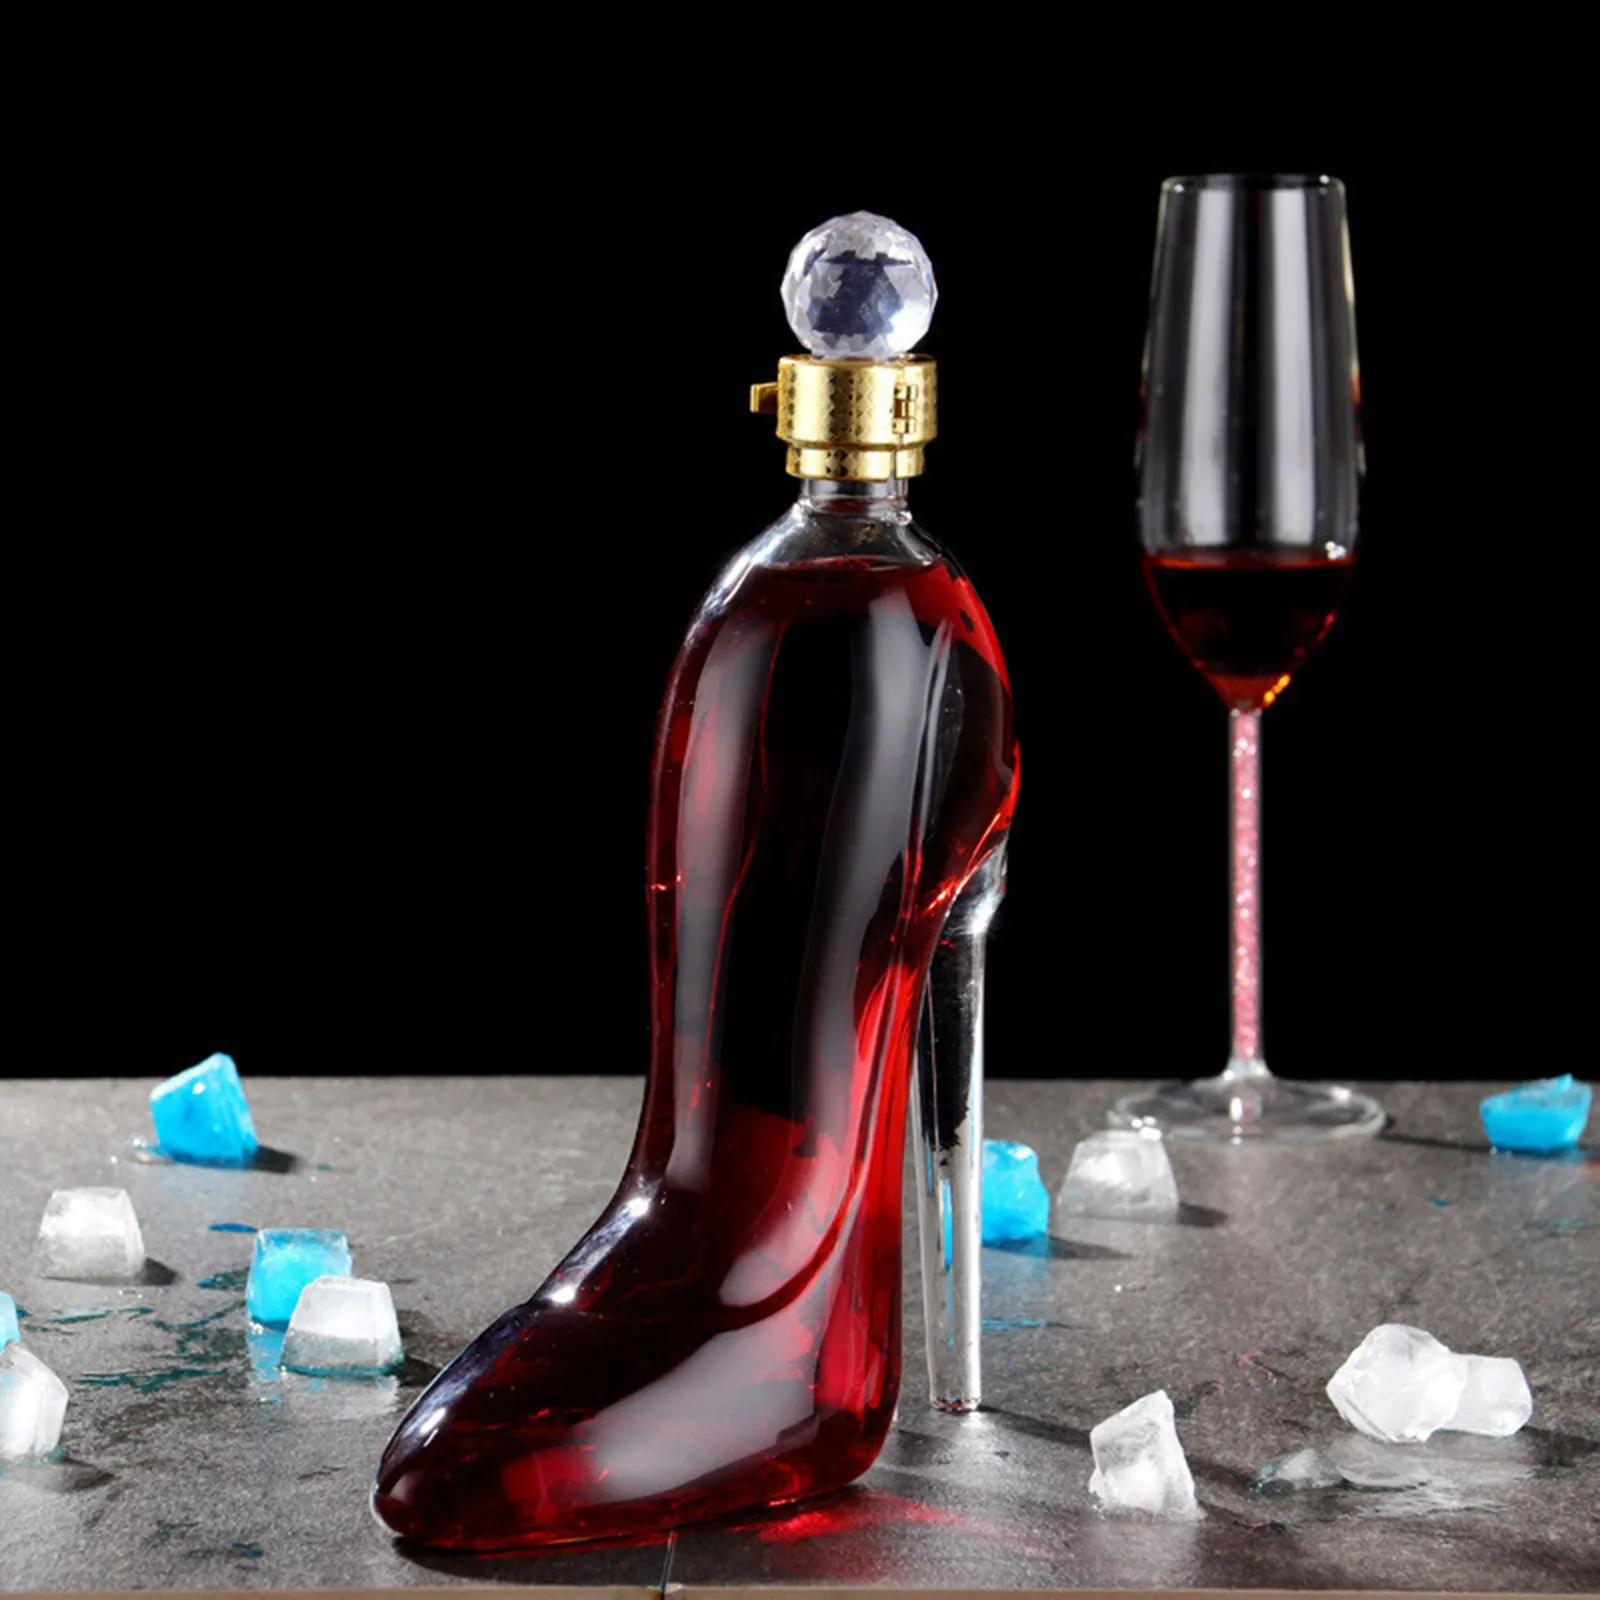 Amazon.com | Heel Stiletto High Heels Shape Decanter Whiskey and Wine  Decanter with Stopper - High Heel Decanter for Wine Liquor Bourbon Tequila,  Elegant Decanter Gifts for Women - Copyright Design: Wine Decanters